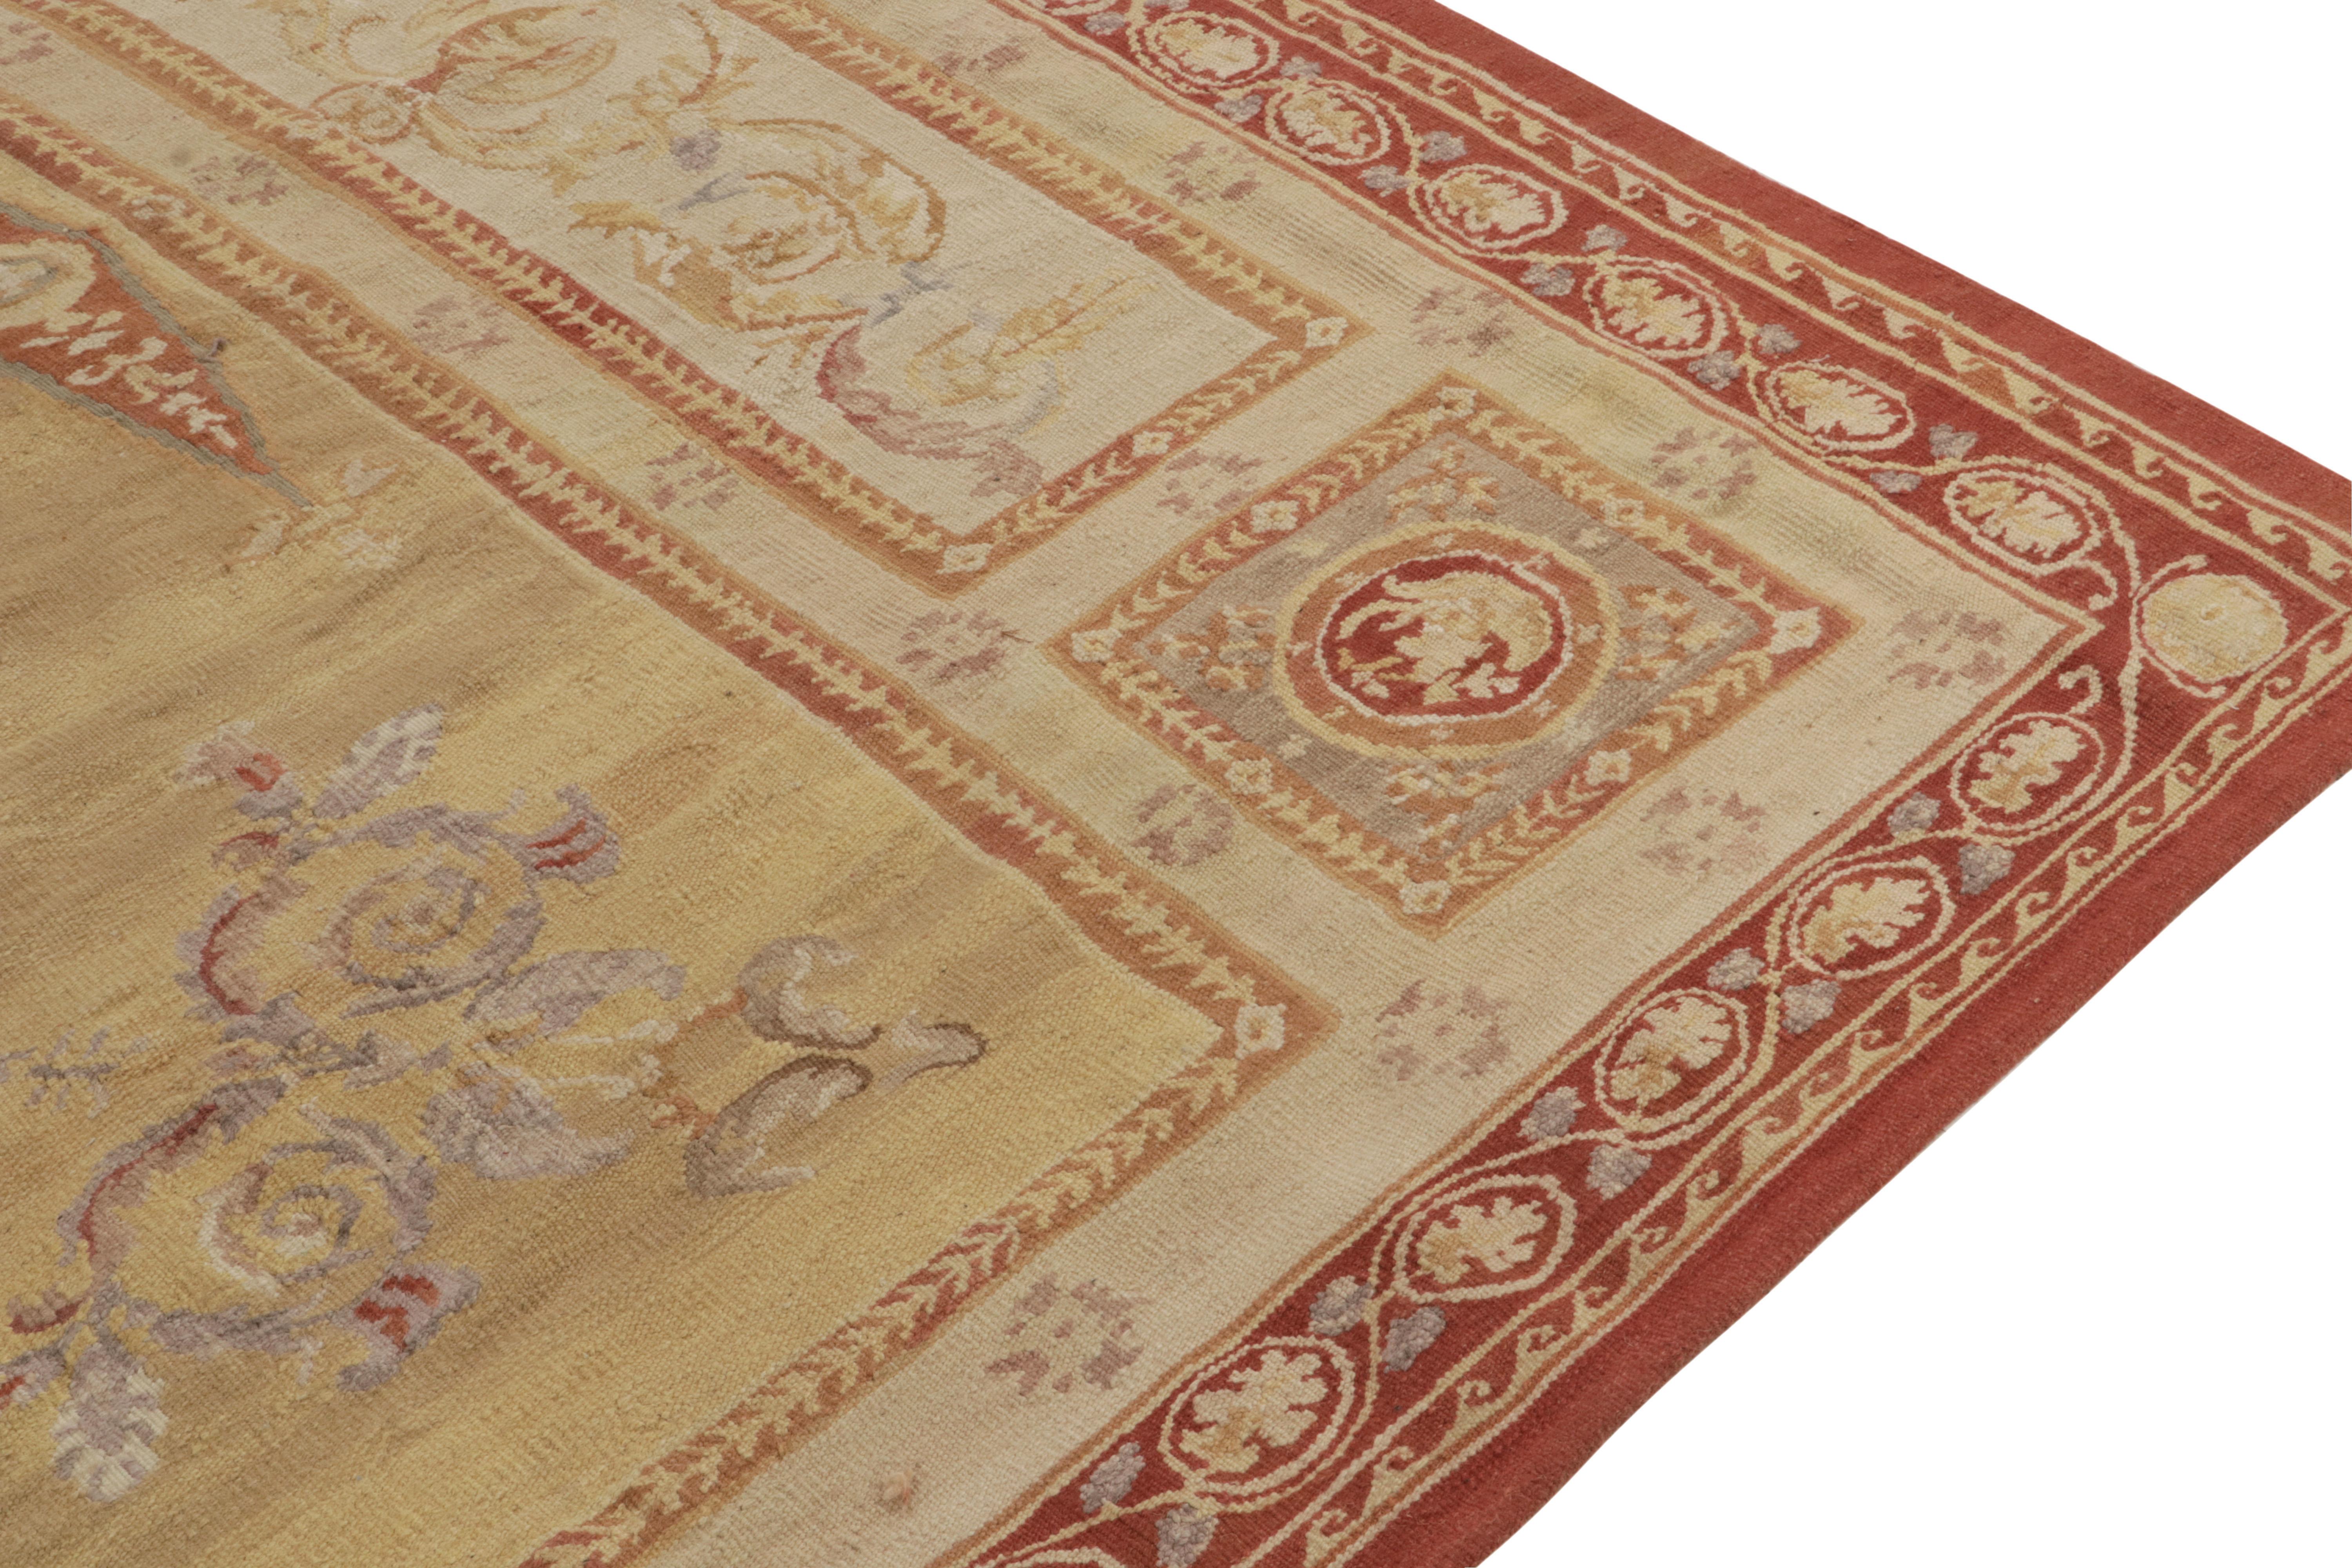 Rug & Kilim's Aubusson Style Flatweave Rug in Beige-Brown, Red Floral Medallion In New Condition For Sale In Long Island City, NY